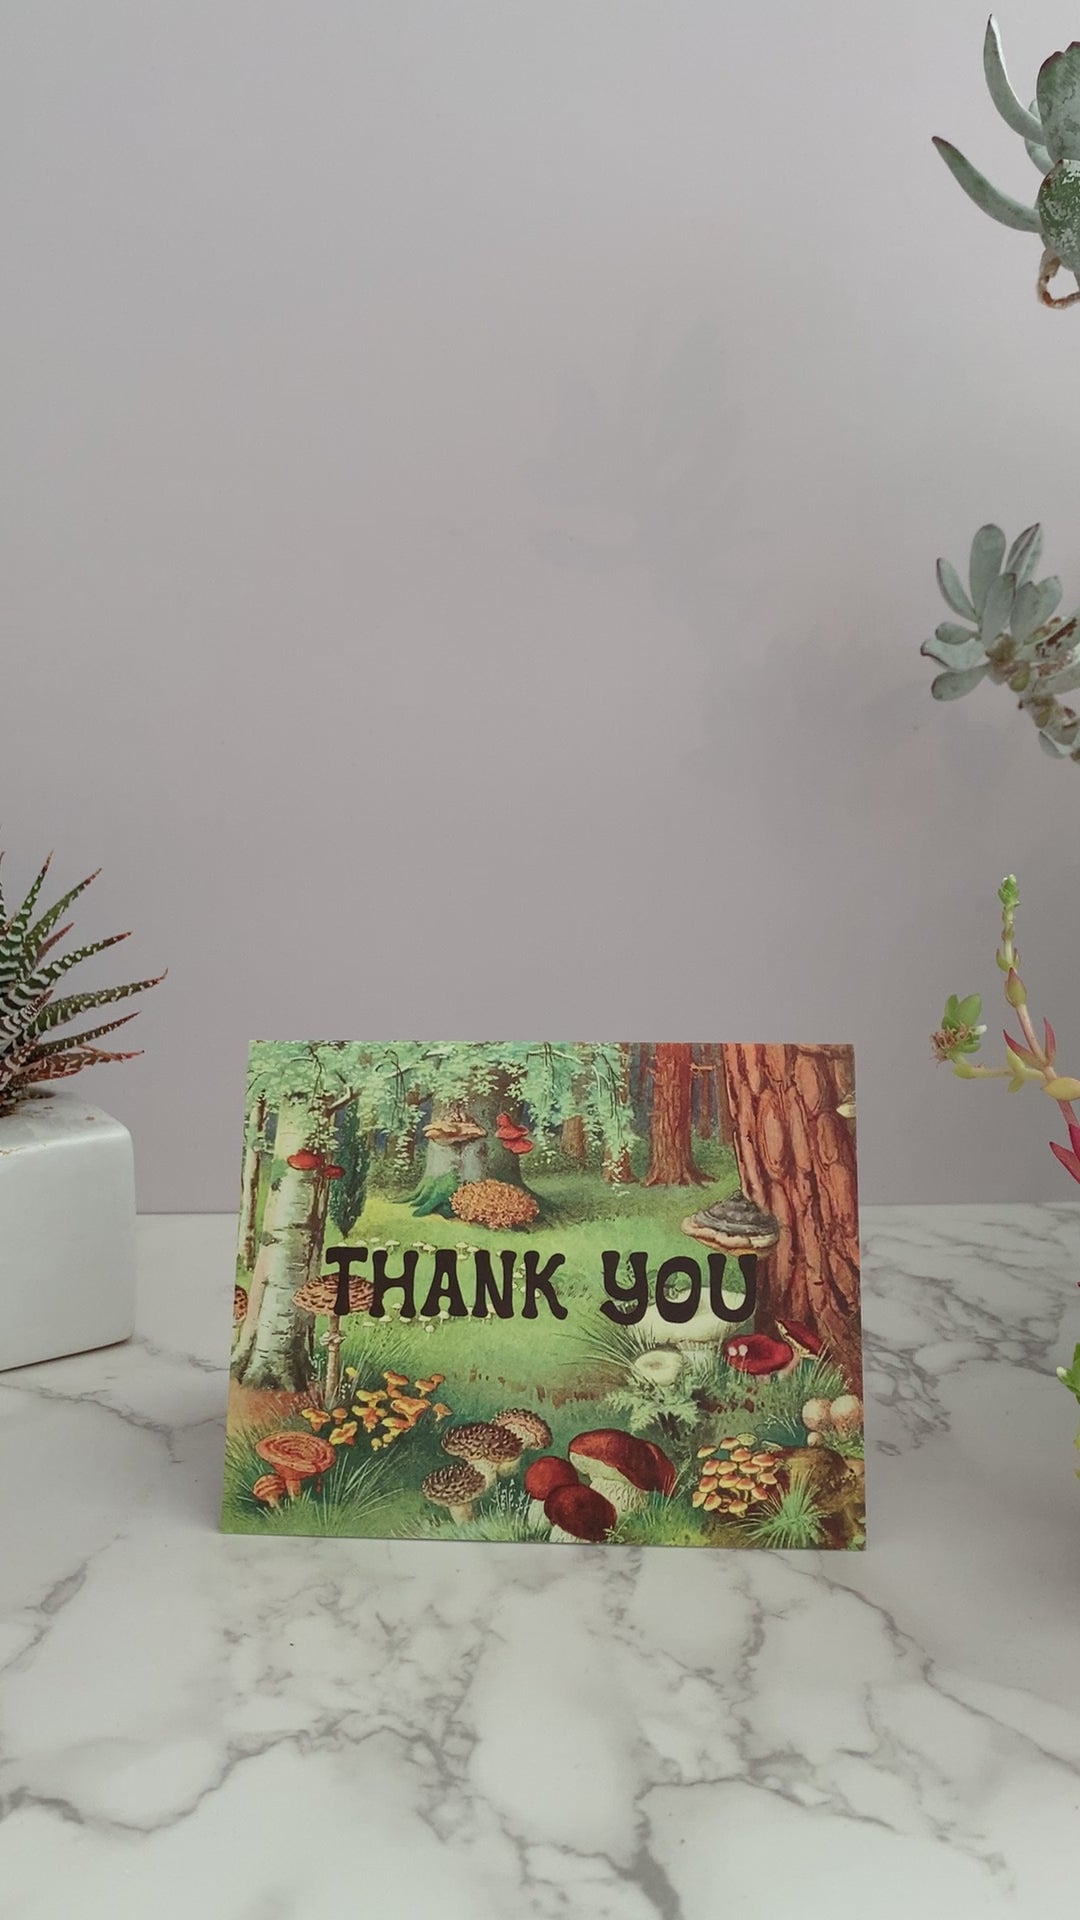 Cute Thank You greeting card. Vintage forrest scene with trees and mushrooms. Greeting on the front of the card says Thank you. Blank inside. 